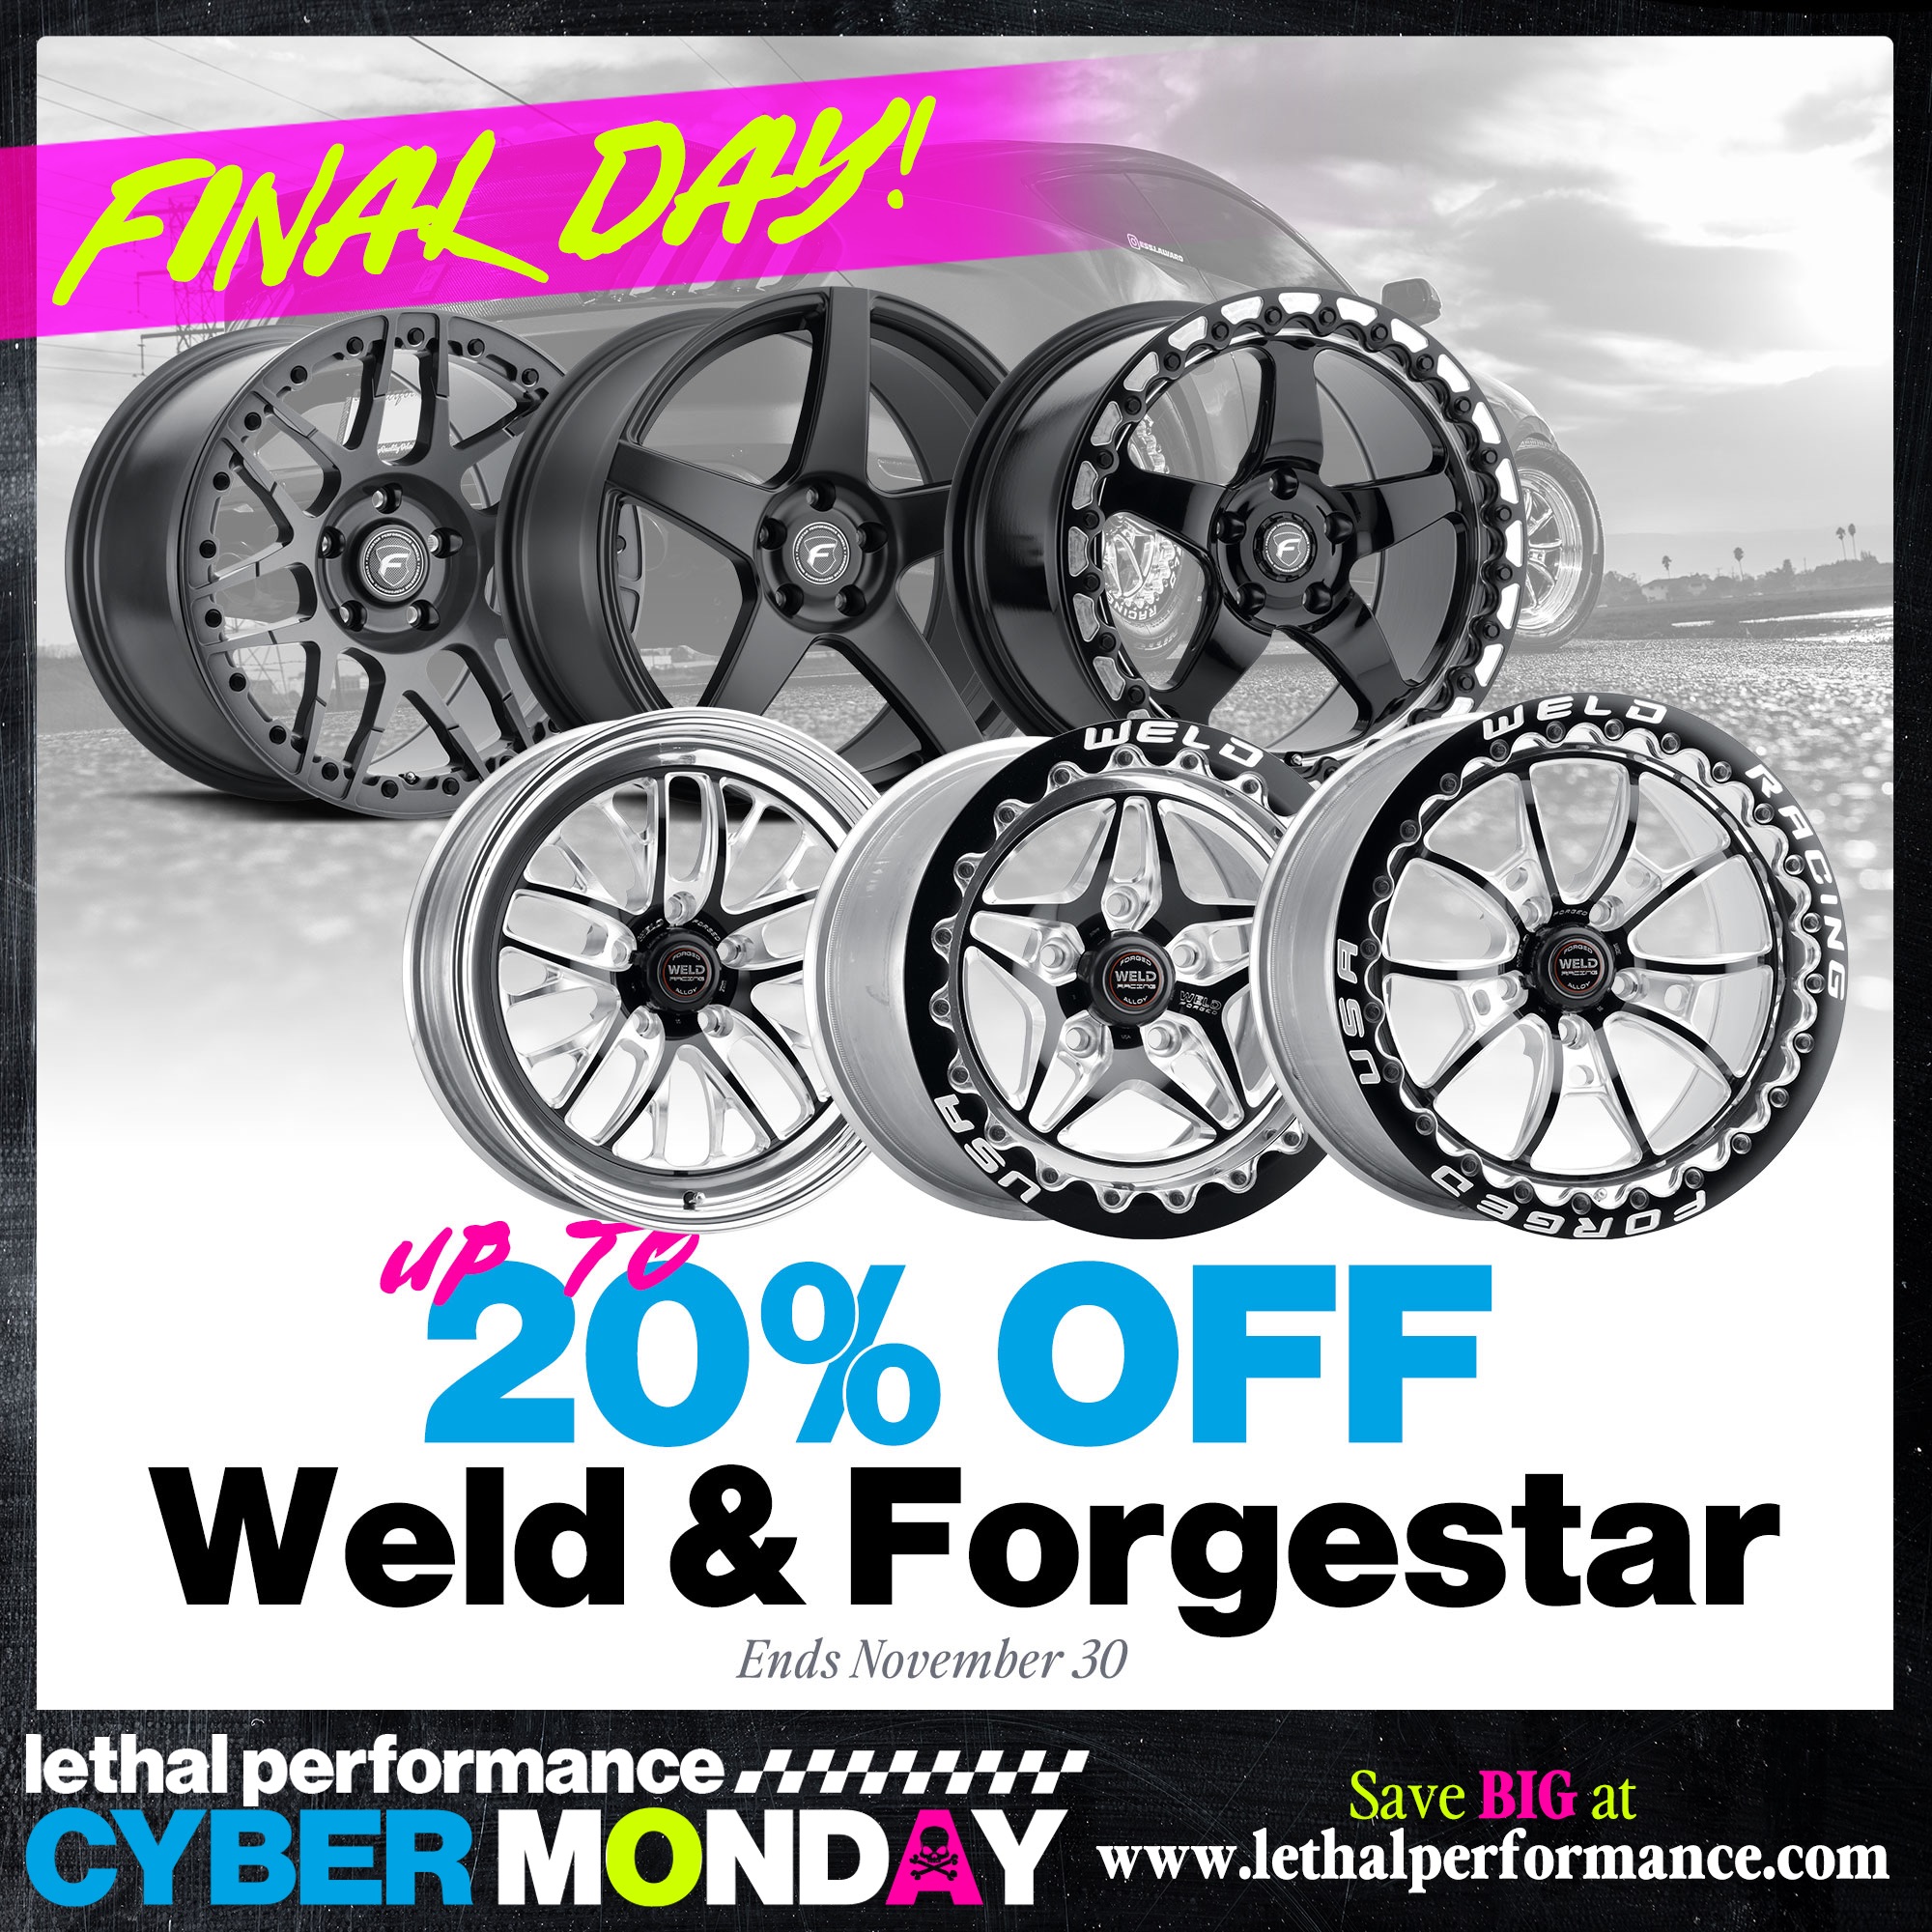 S650 Mustang Black Friday starts NOW! Up to 50% off! weld_foregtsar final cm